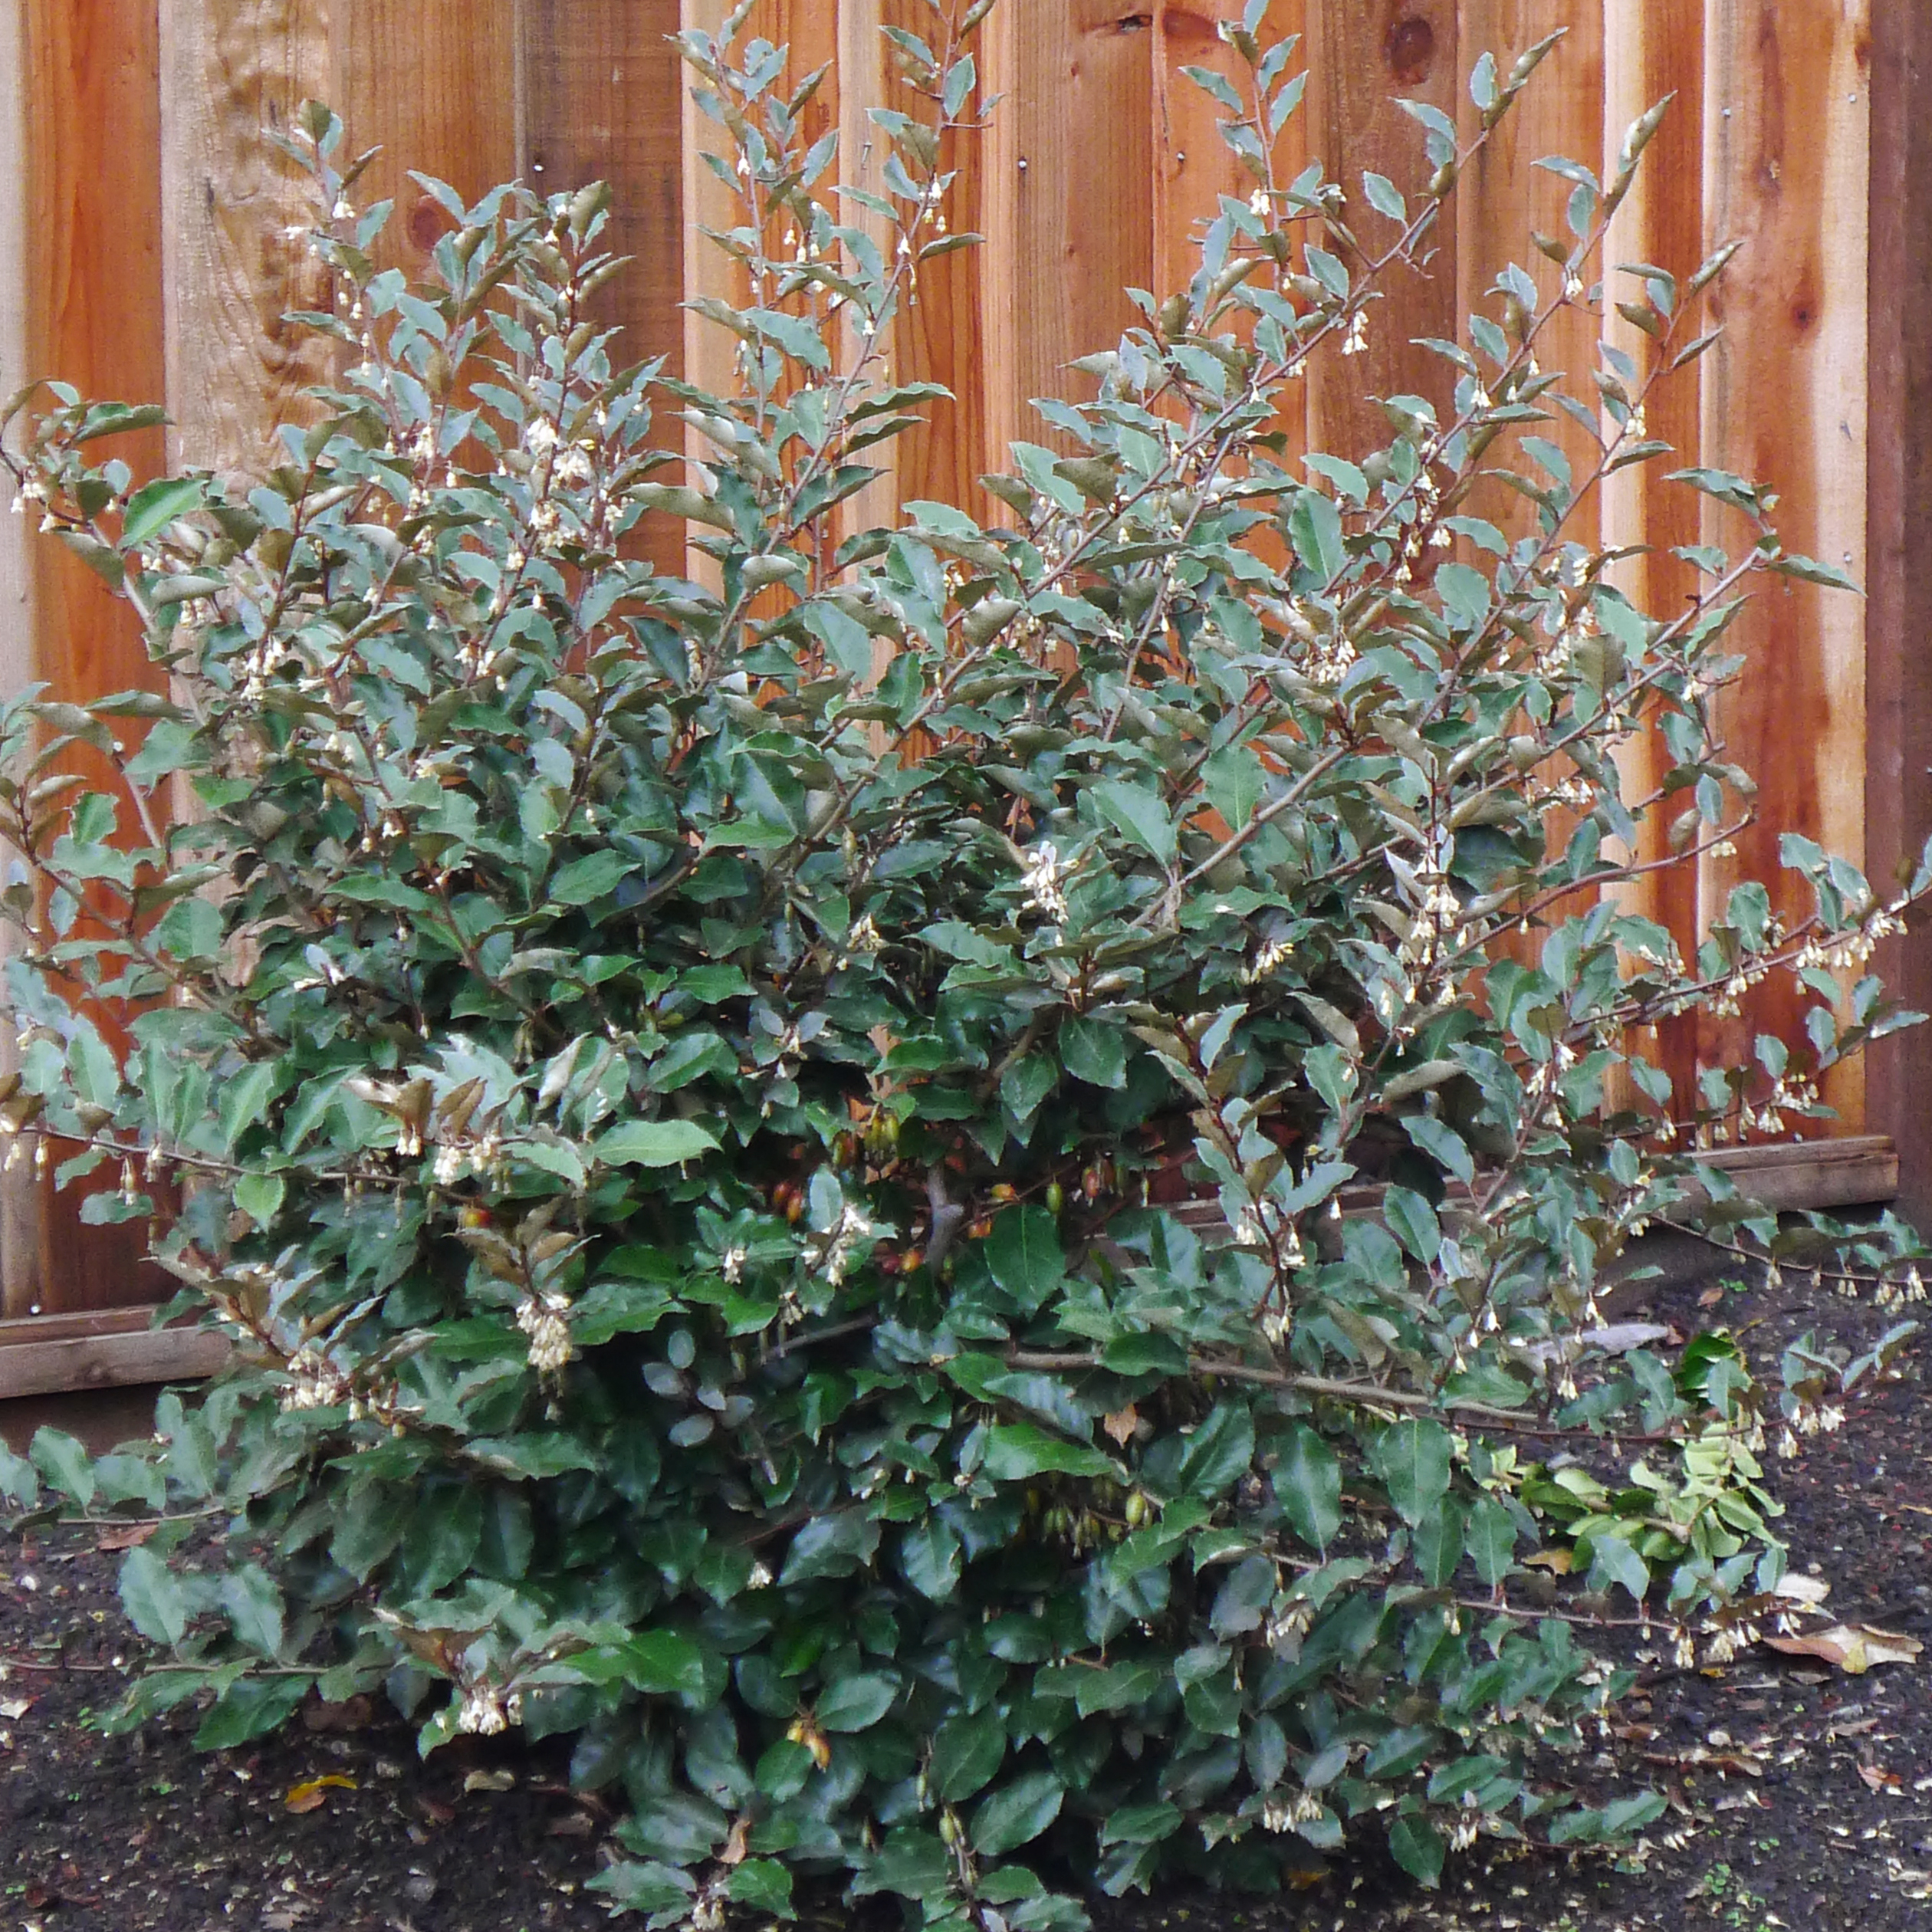 Image of Silverberry bush in full bloom